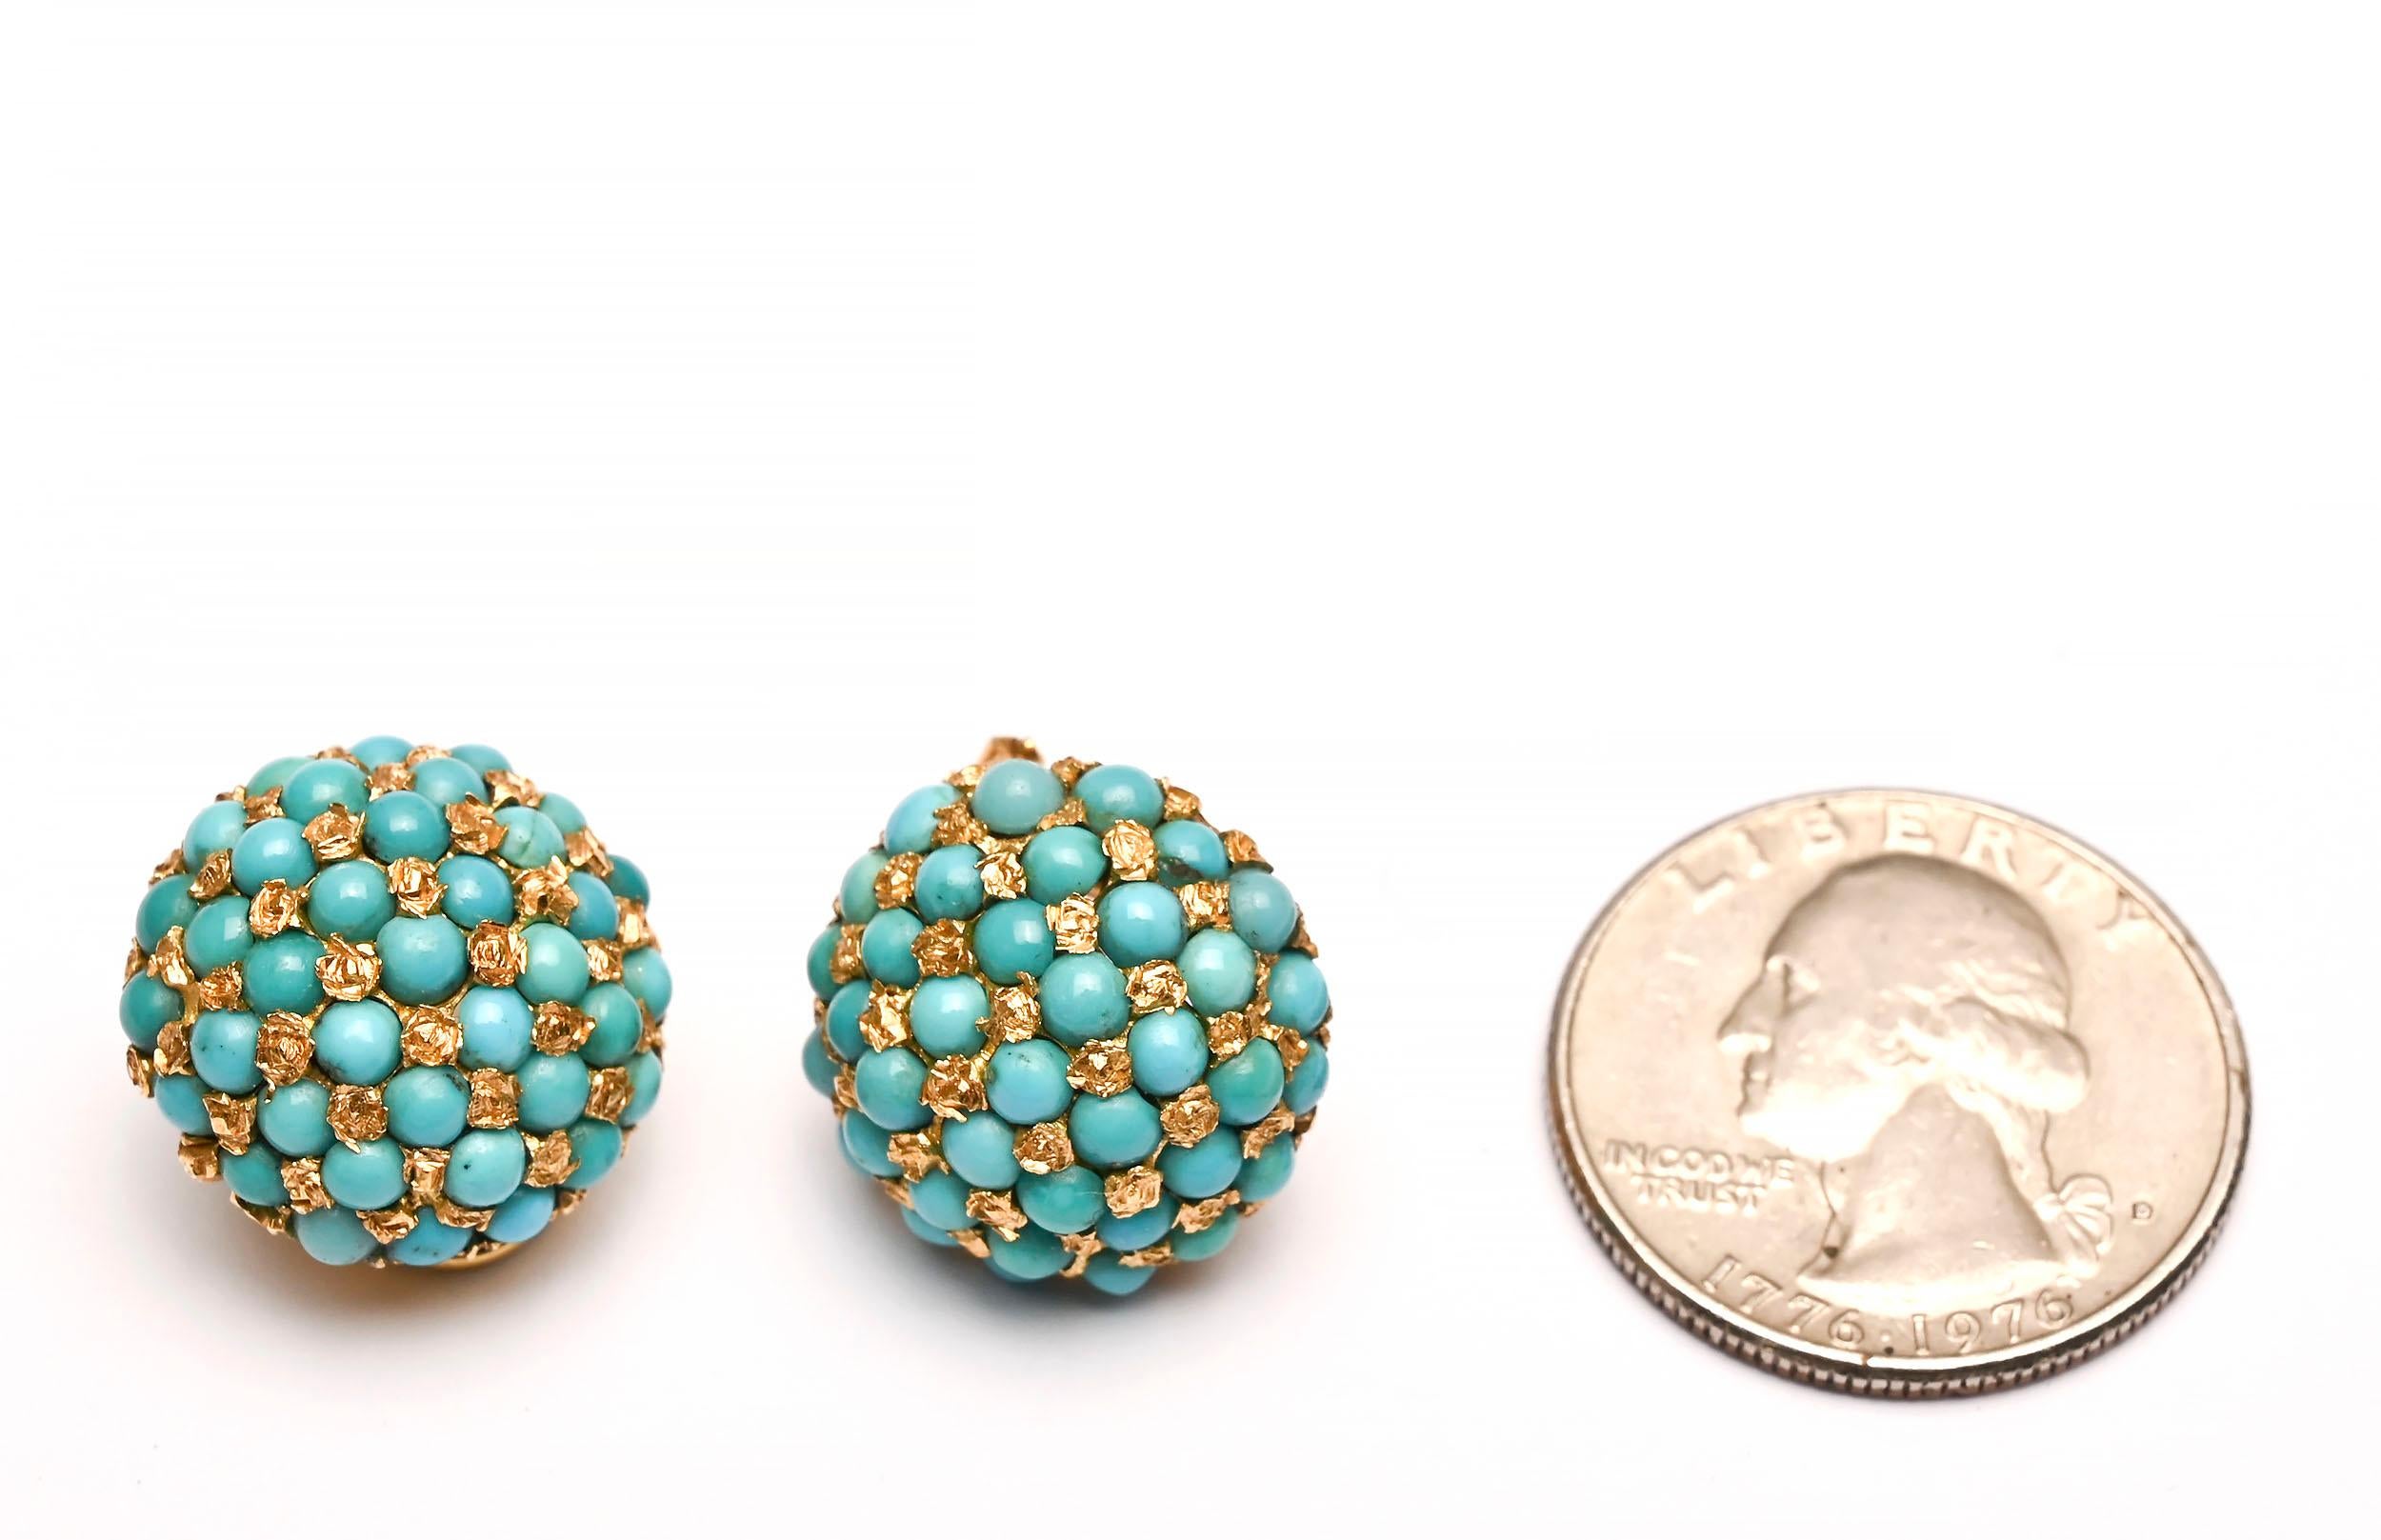 Dome shaped earrings of round turquoise stones set next to textured circles of 18 karat gold. The turquoise is richly colored and well matched. The gold circle in the back is not visible when worn yet the maker decorated it with a scored design,